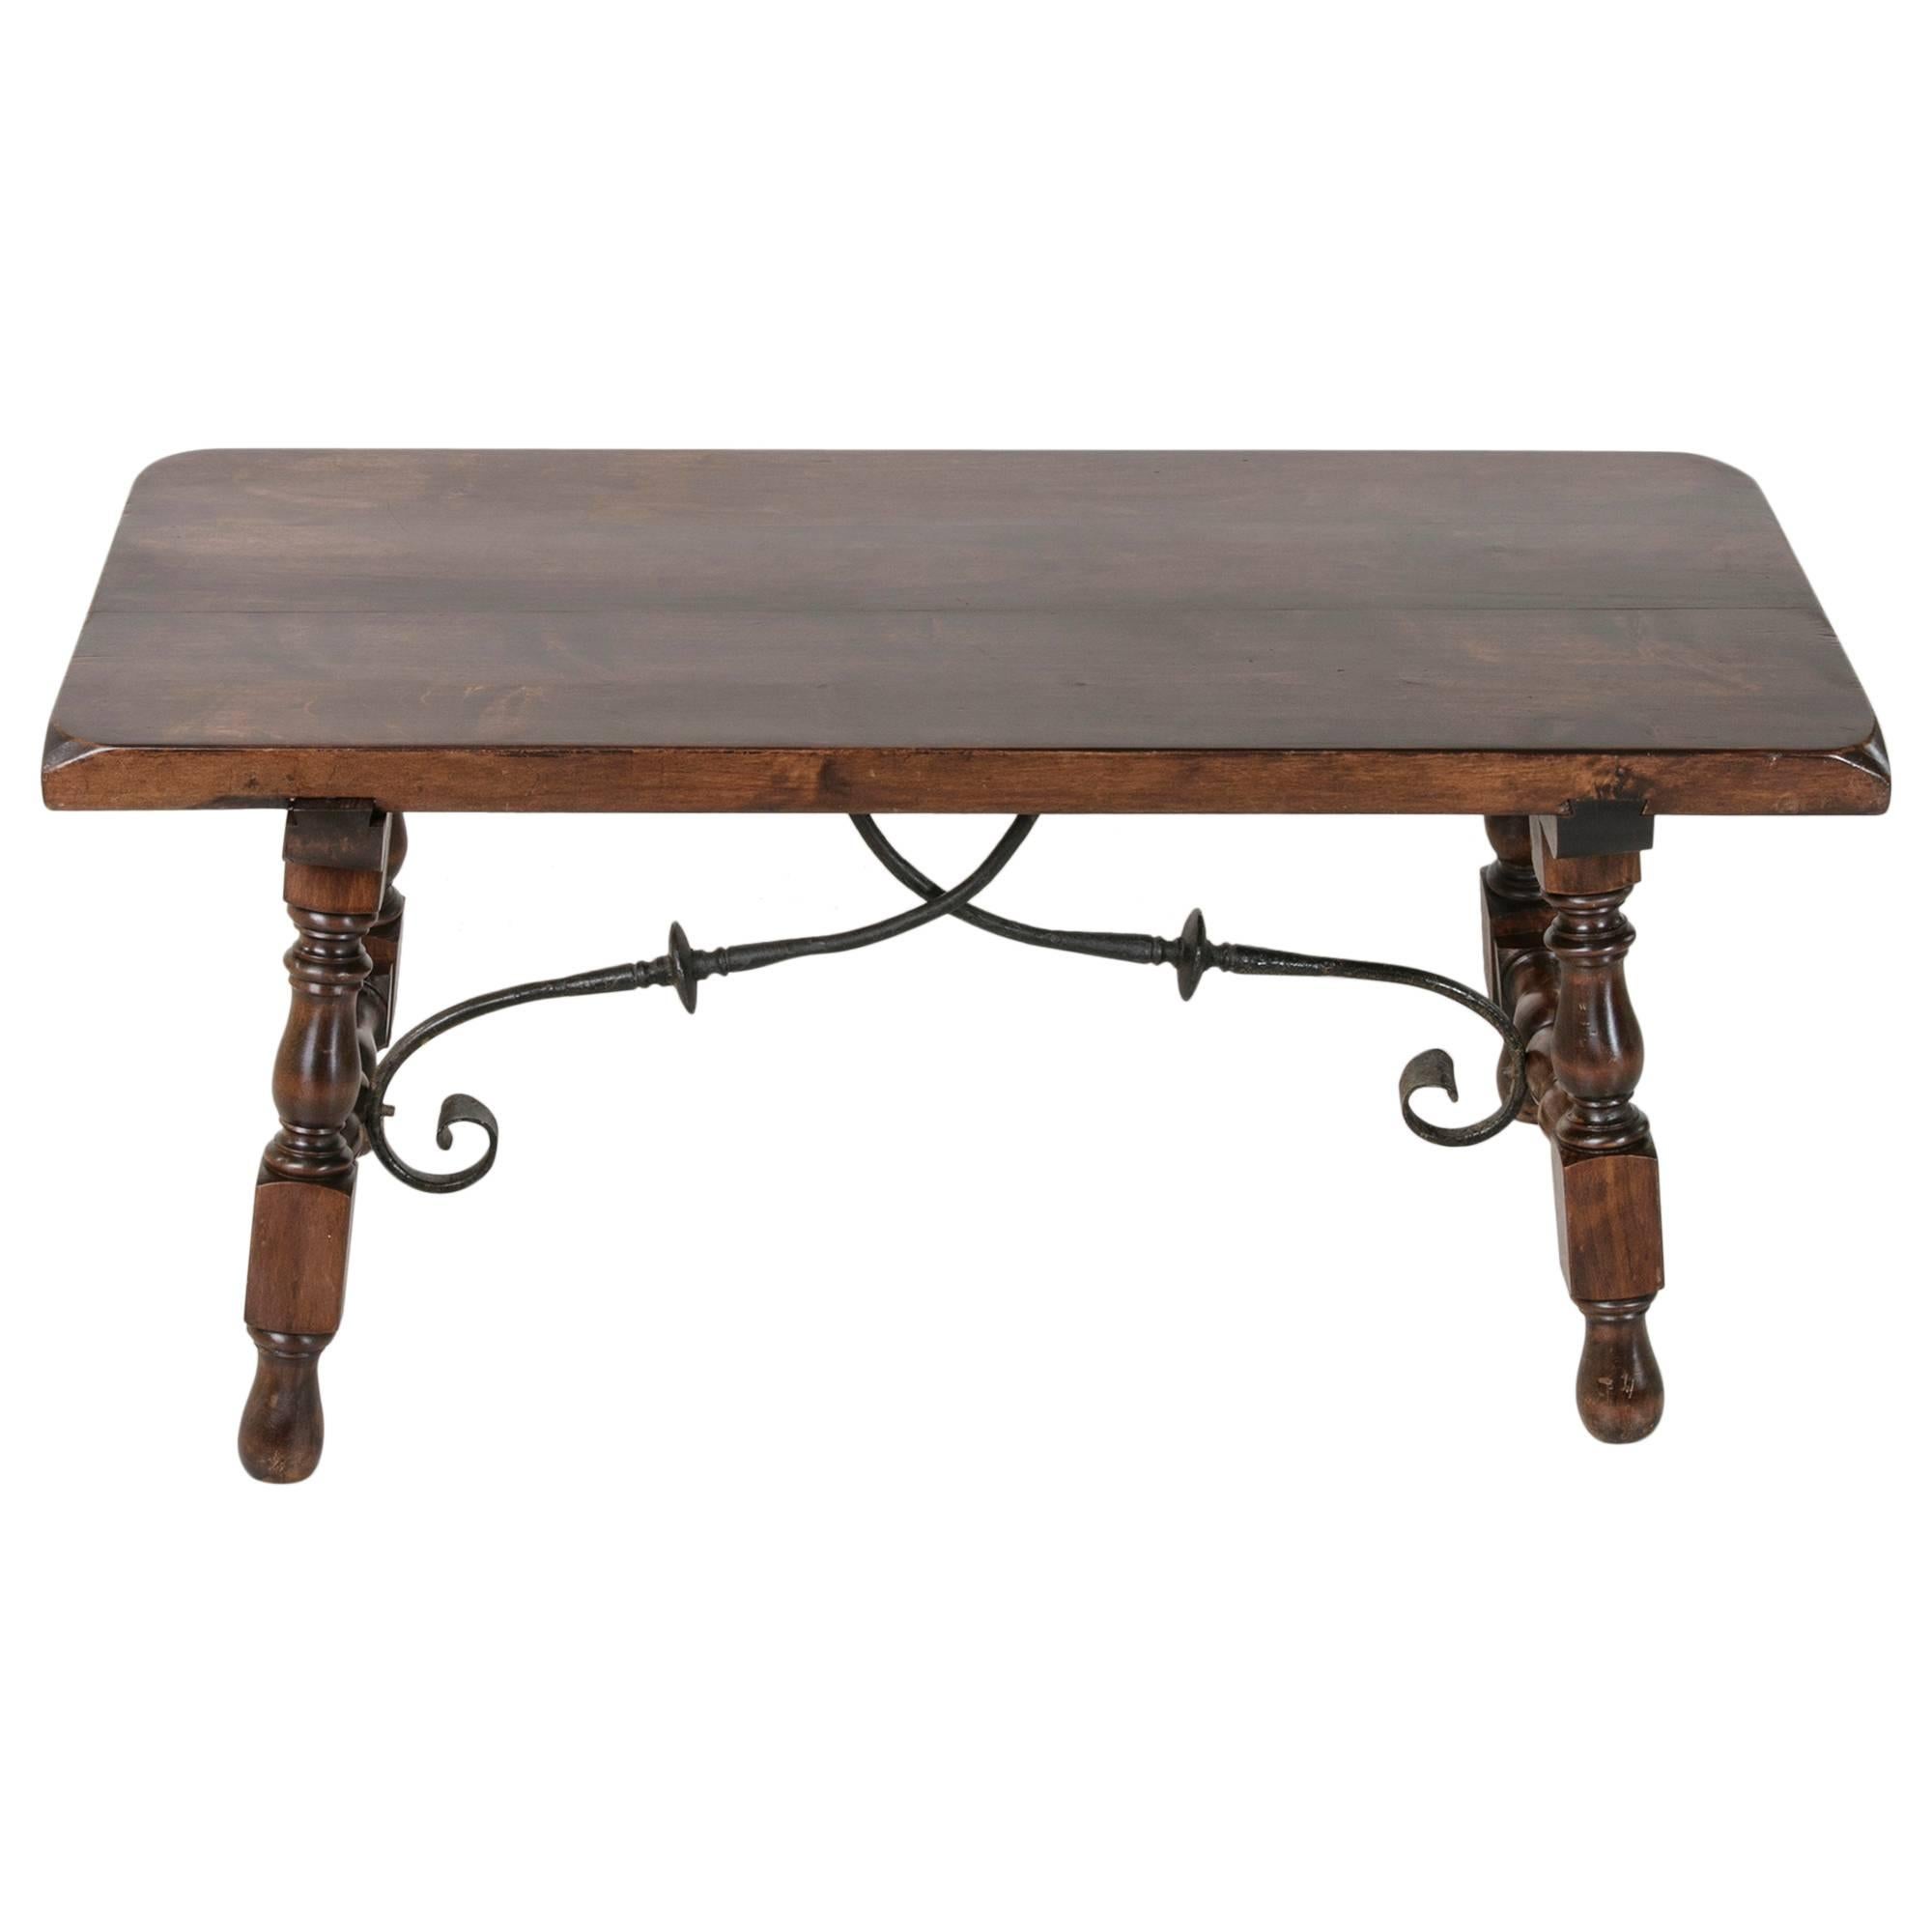 Spanish Renaissance Style Coffee Table or Bench with Hand Forged Iron Stretcher